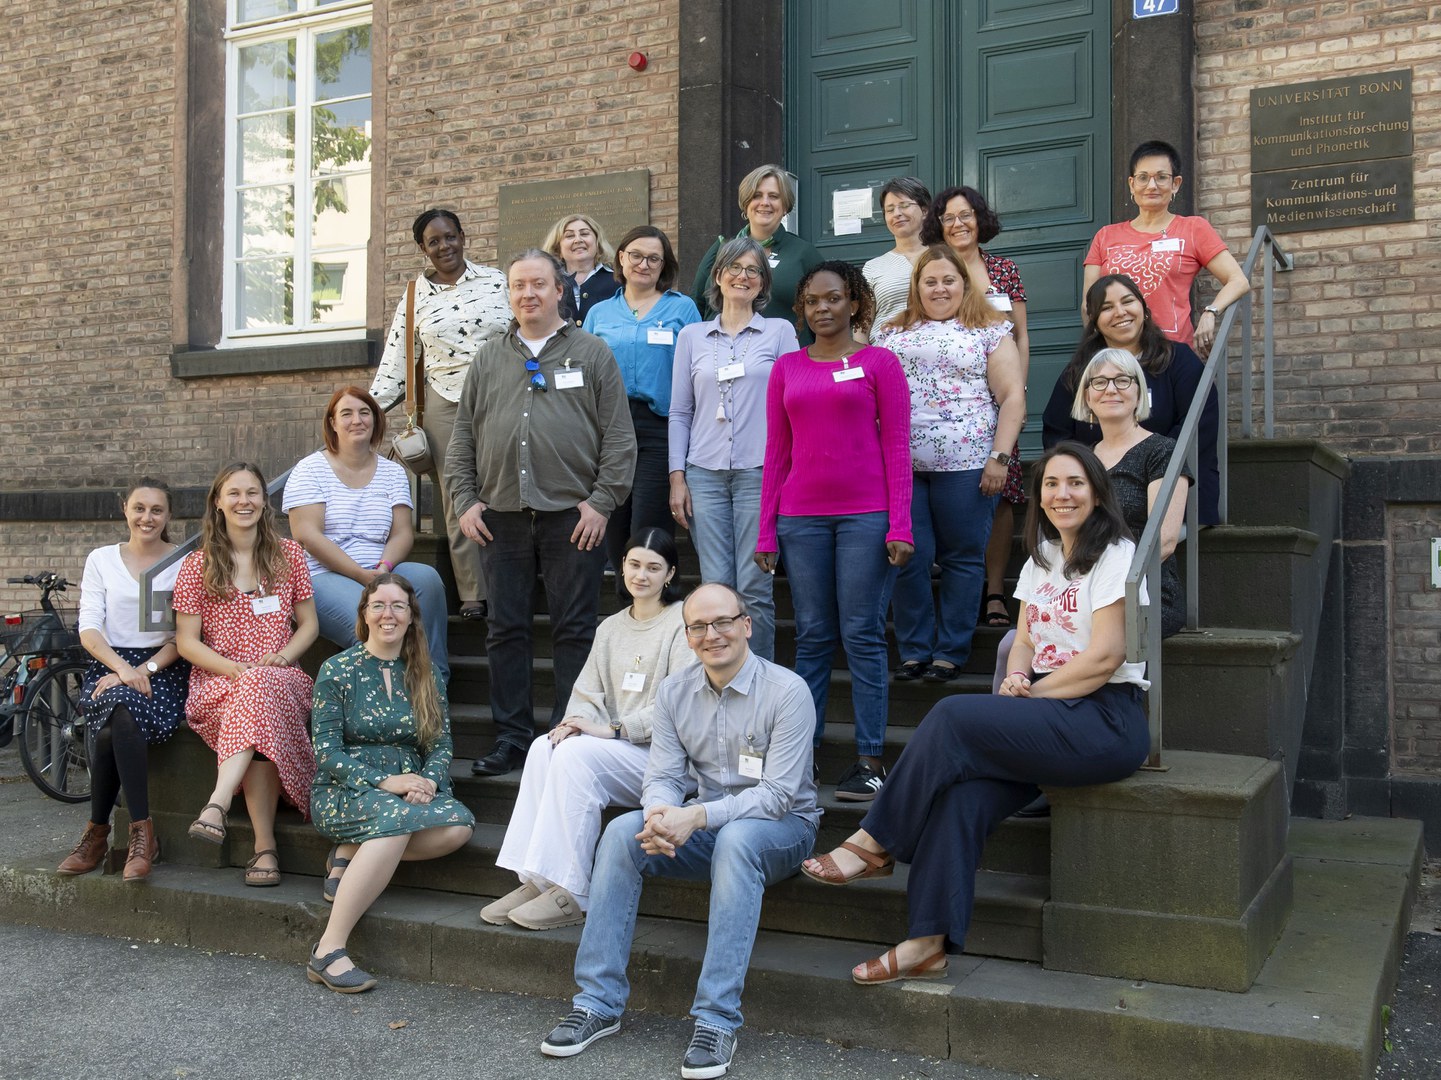 At its Staff Week in May, the University of Bonn welcomed 15 international colleagues from eight different countries.